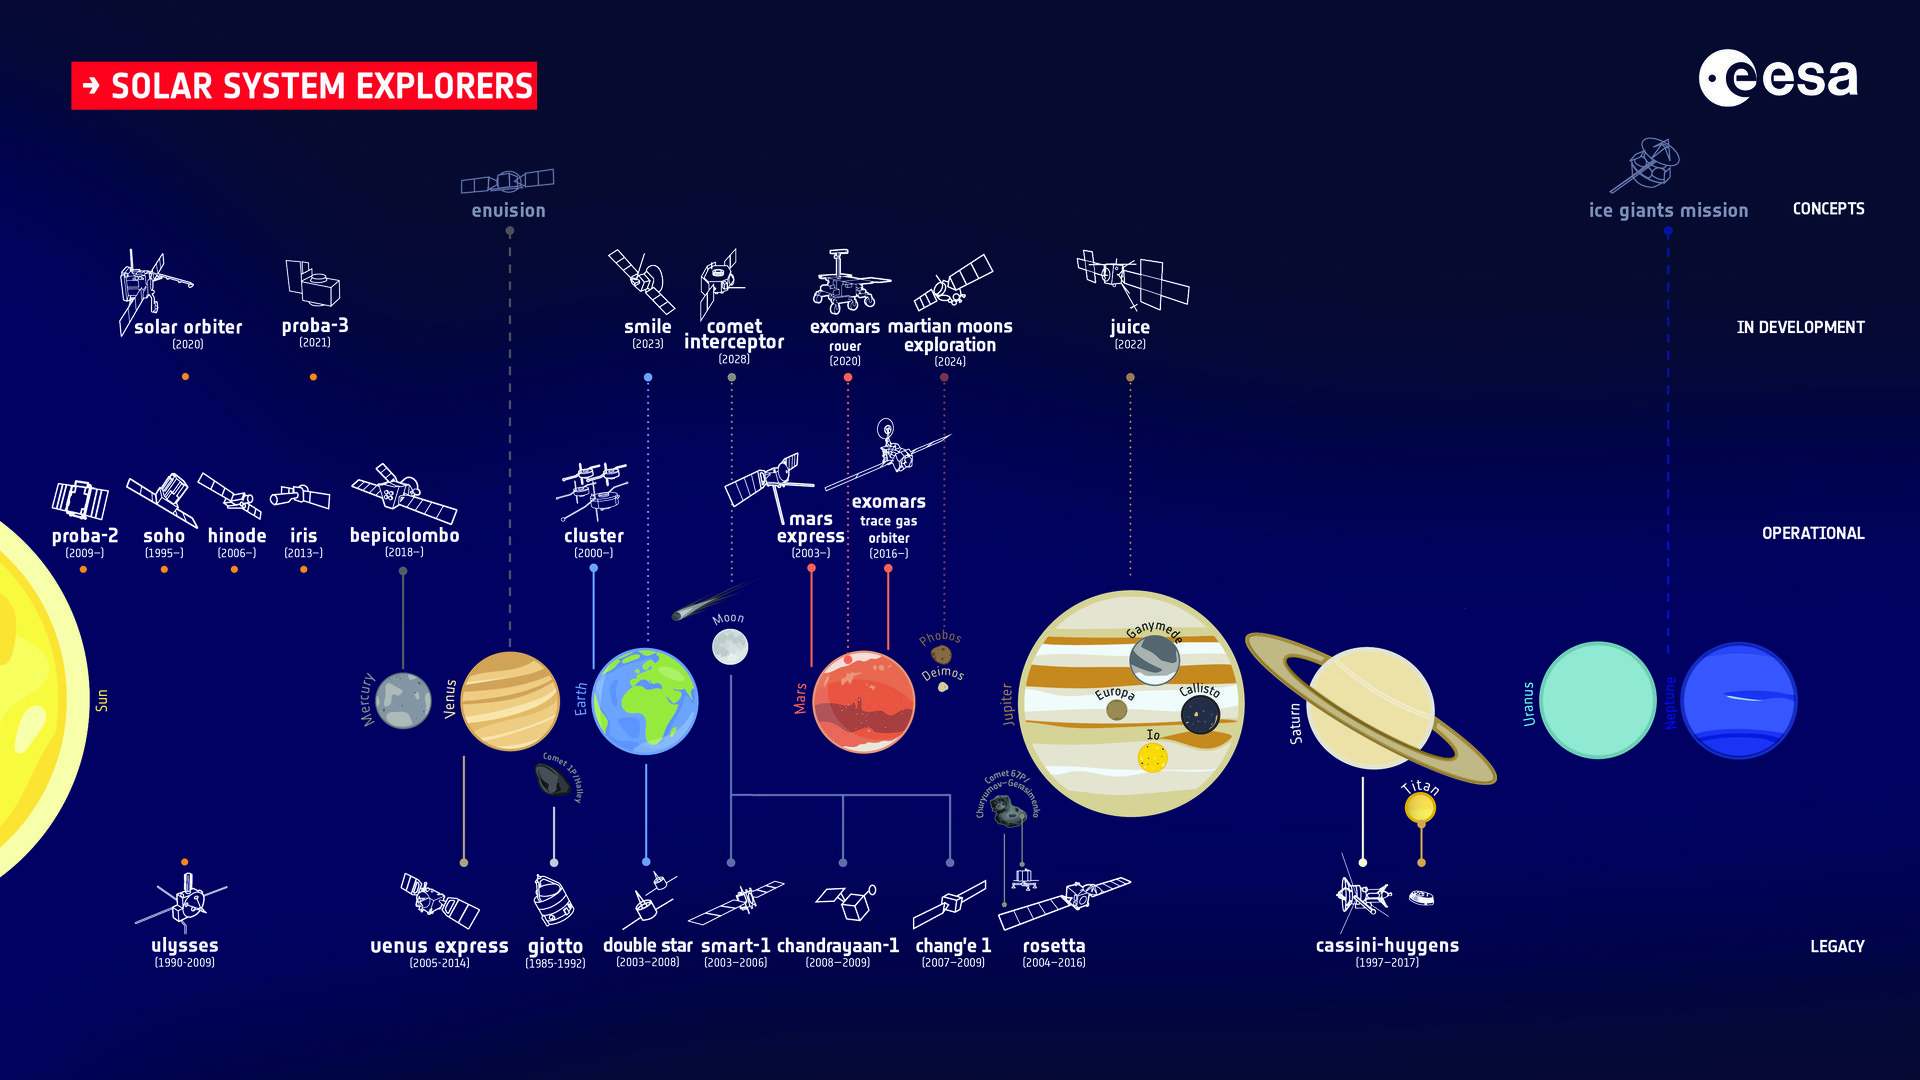 🔥 Download Esa S Fleet Of Solar System Explorers by @emilyg21 | Systema ...